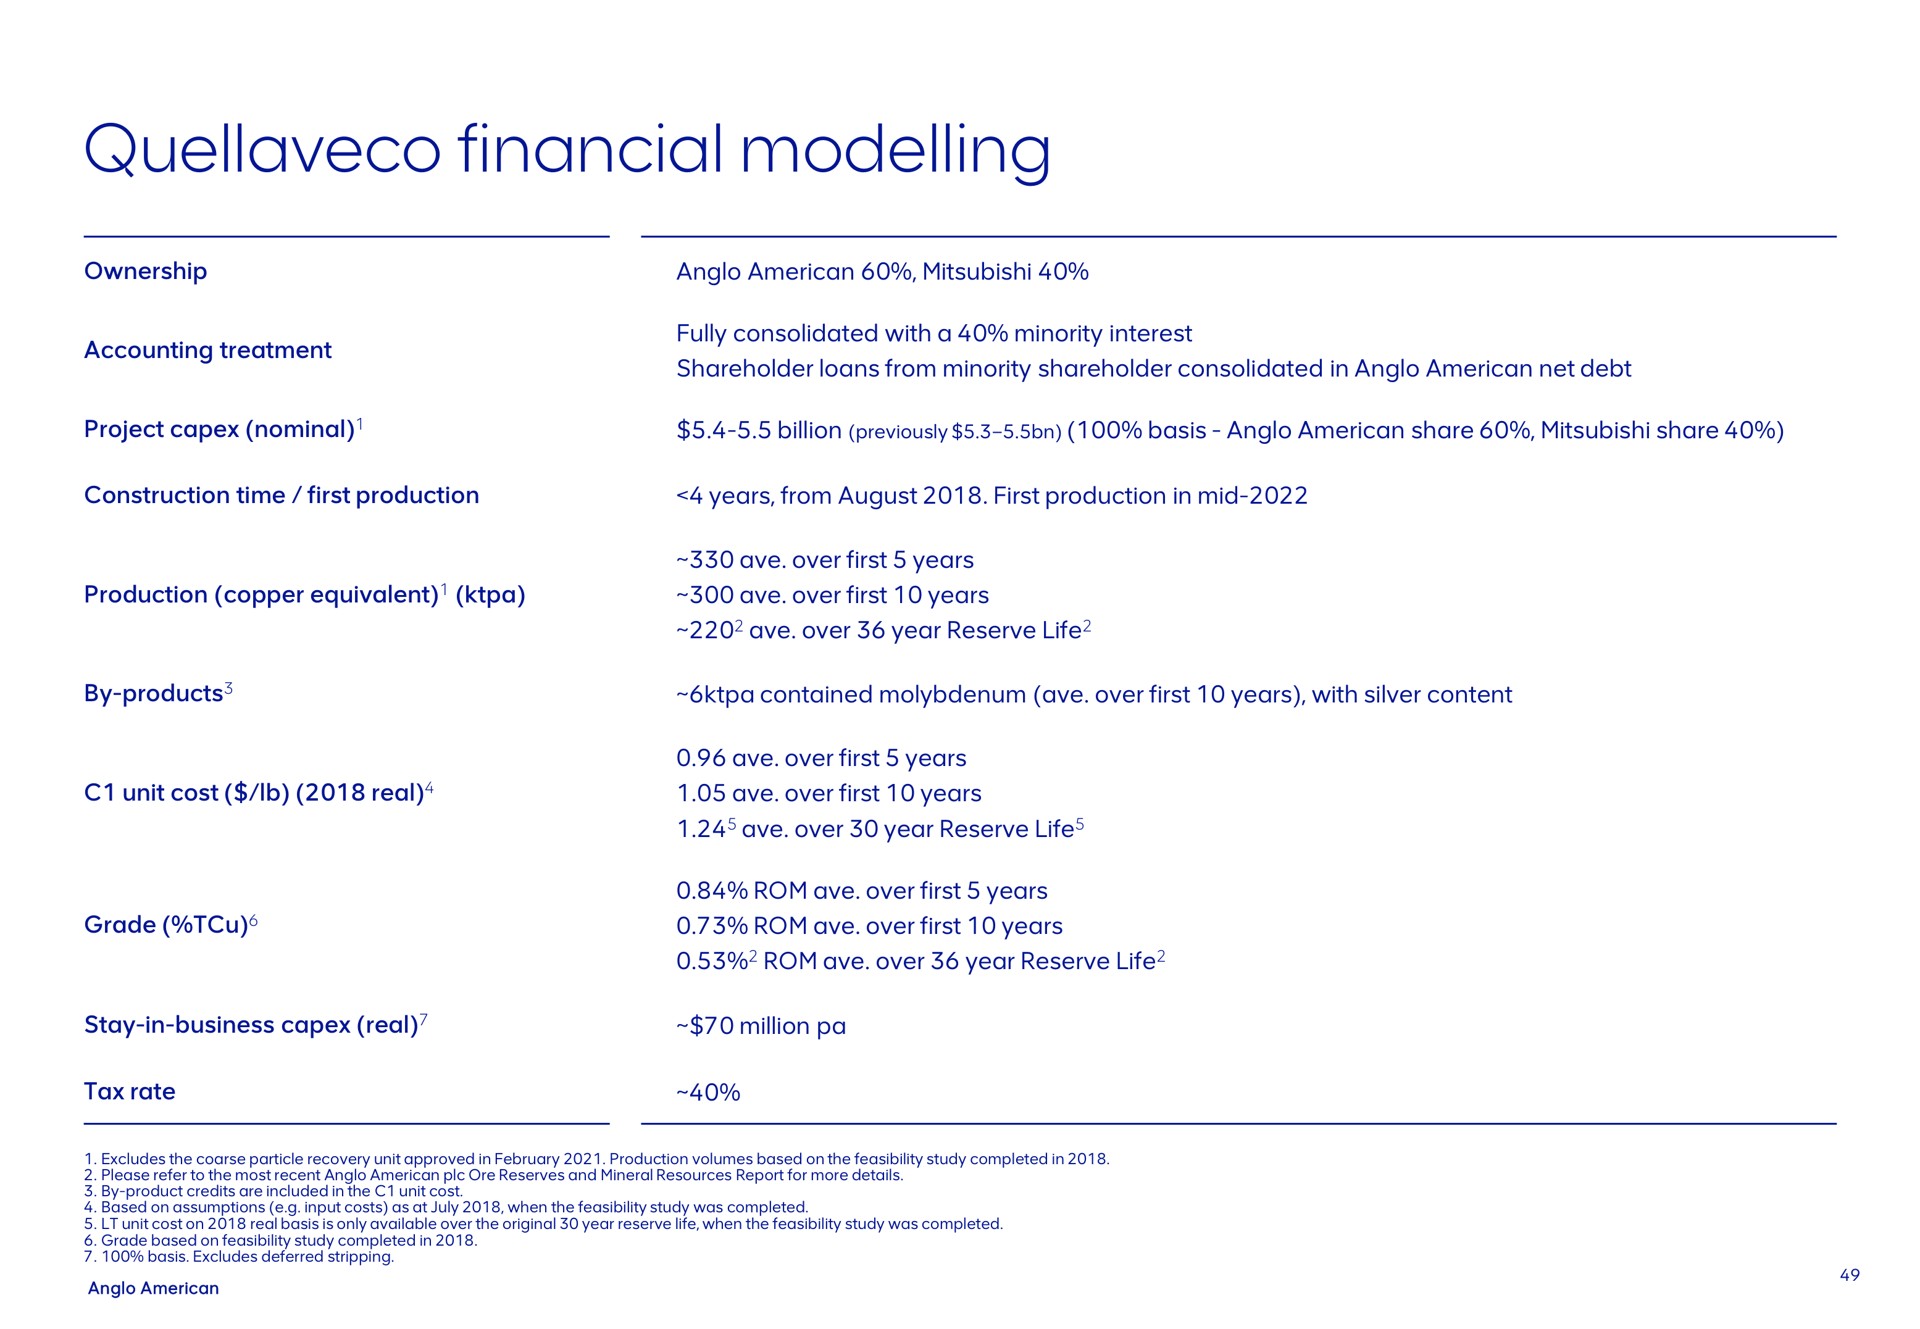 financial modelling | AngloAmerican